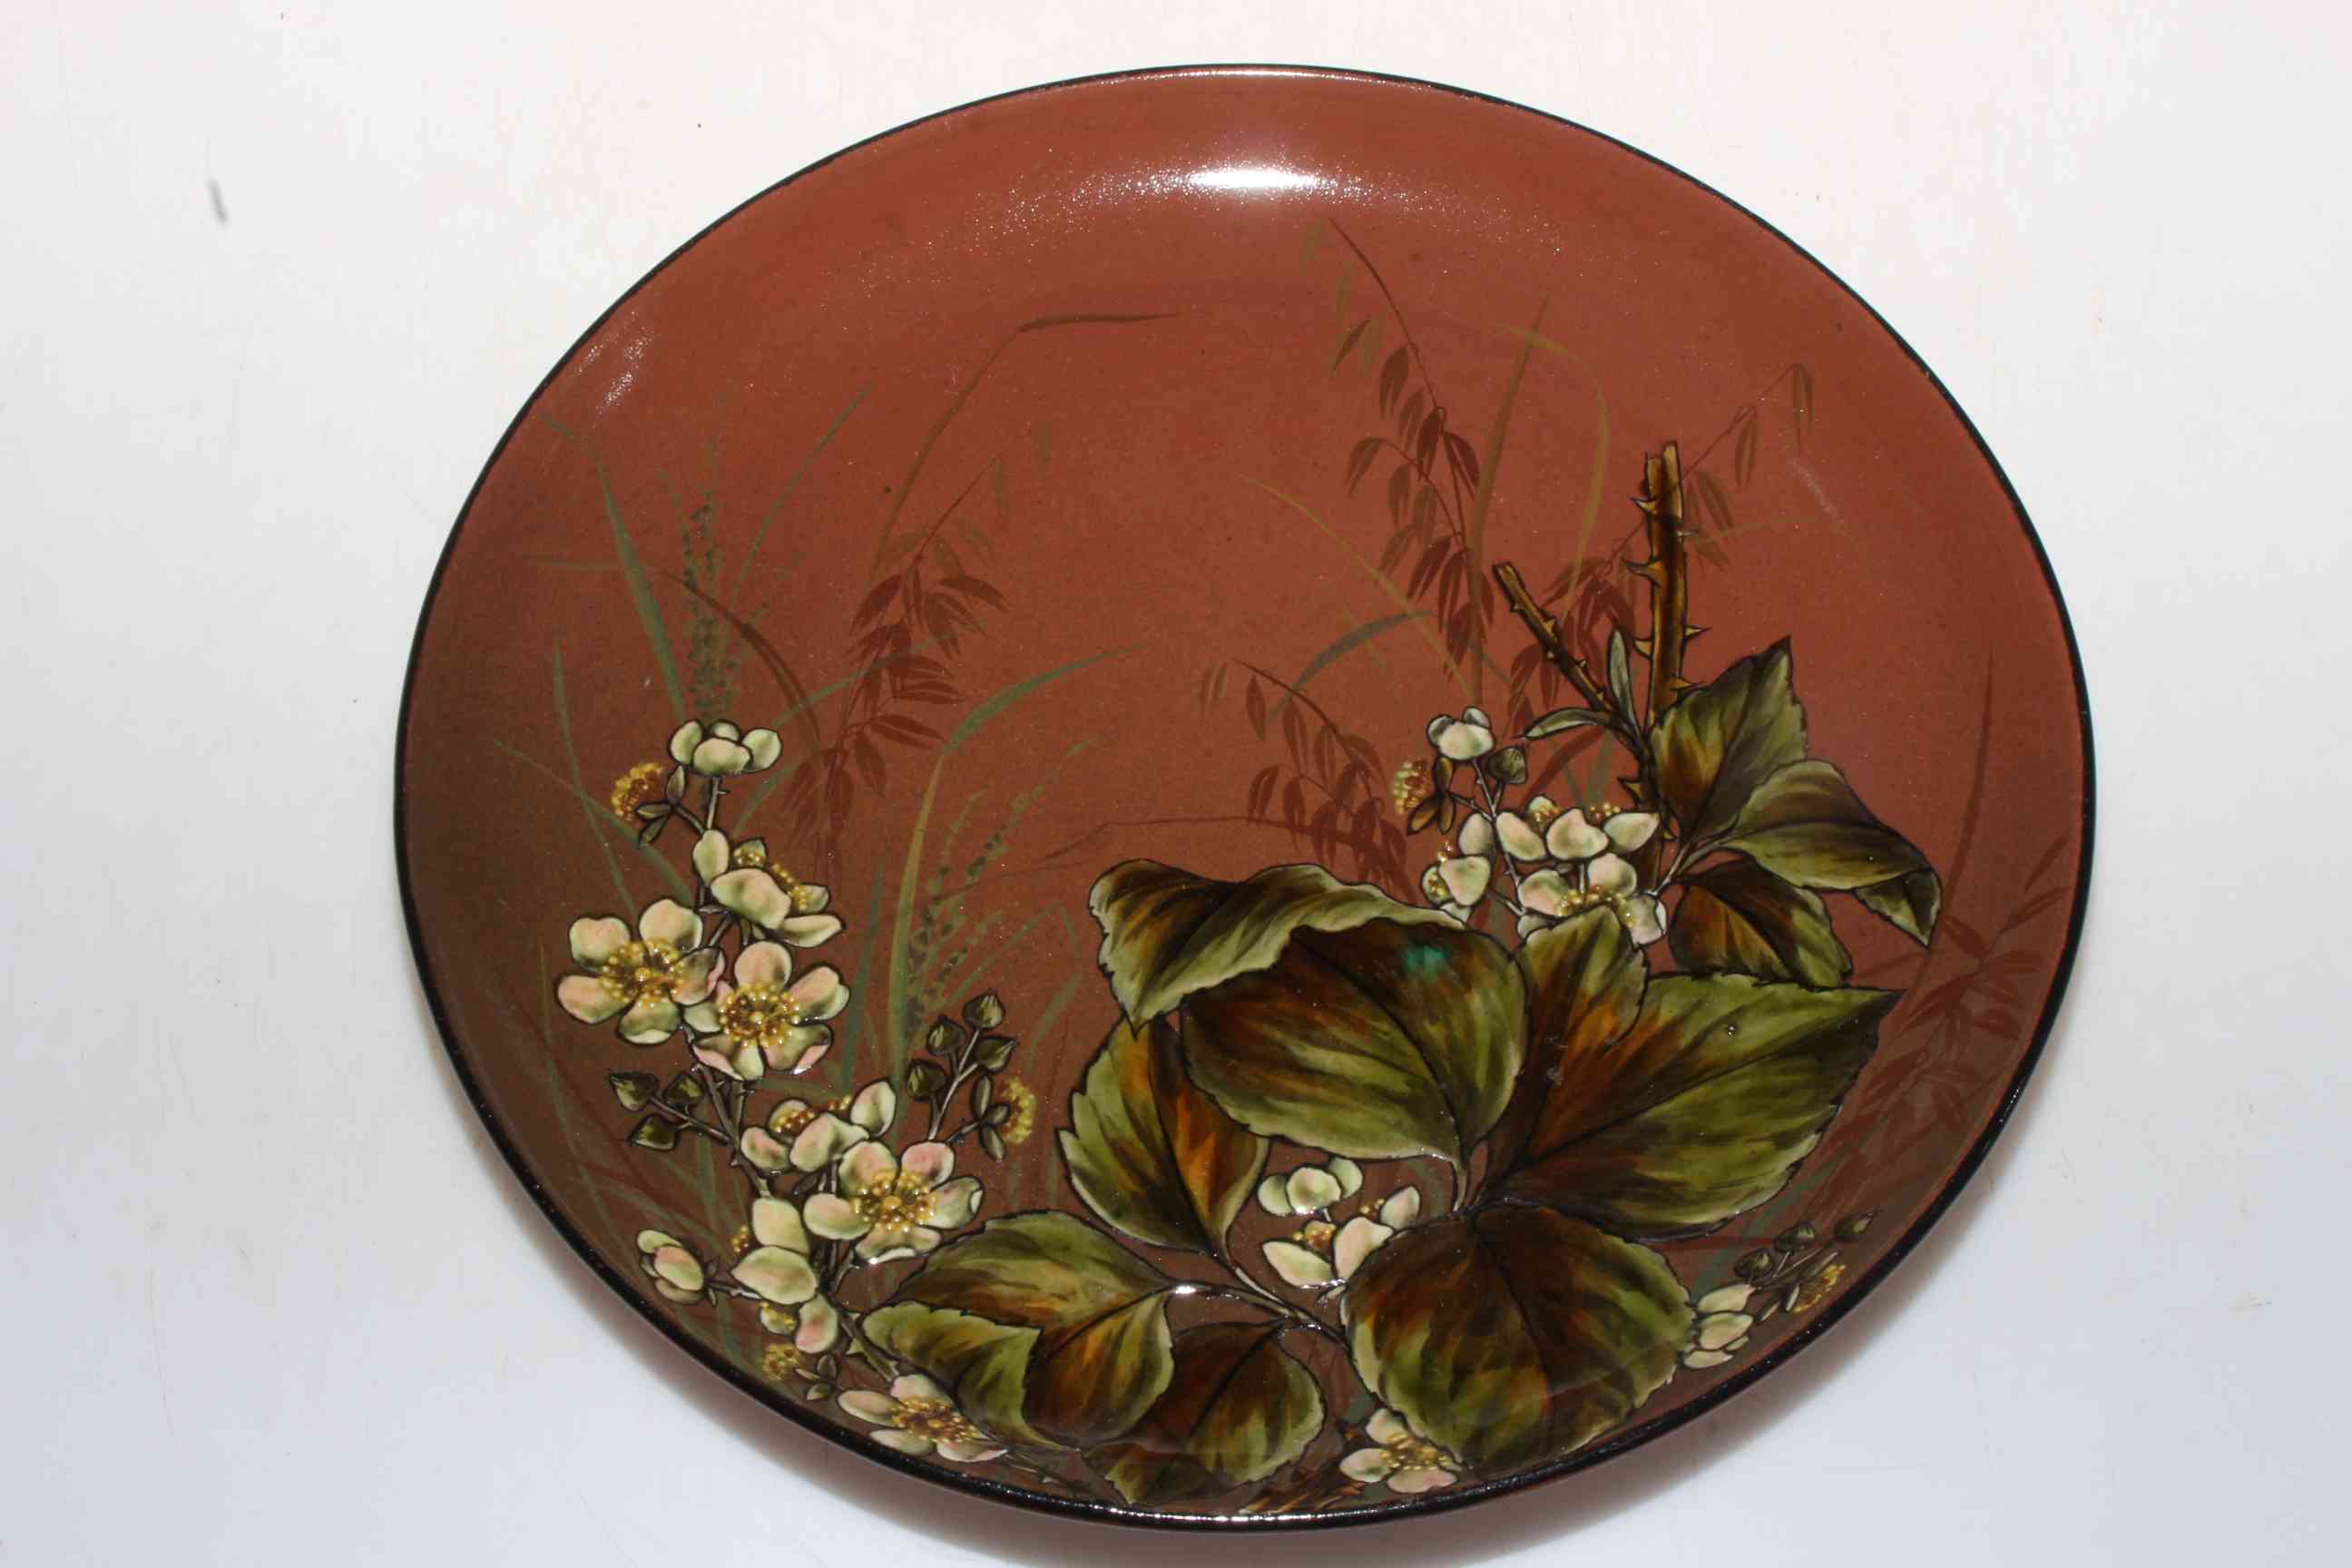 Linthorpe pottery plate with blossom decoration, no. 299.